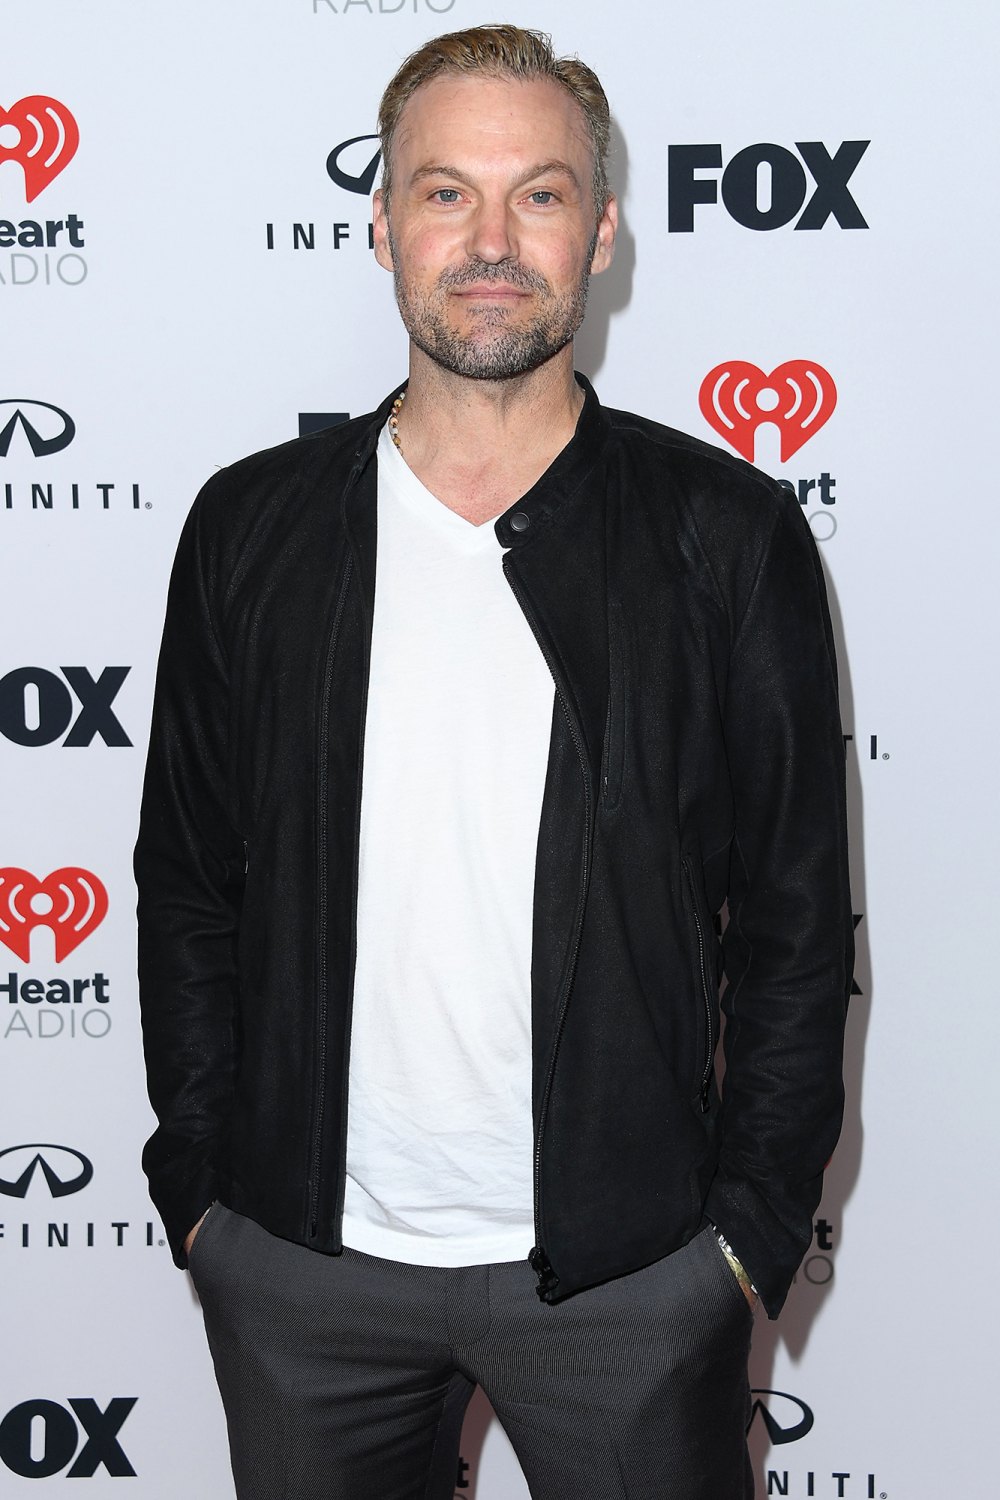 Brian Austin Green 'Couldn't Speak' After Suffering 'Stroke-Like Symptoms,' Details 4-Year Recovery